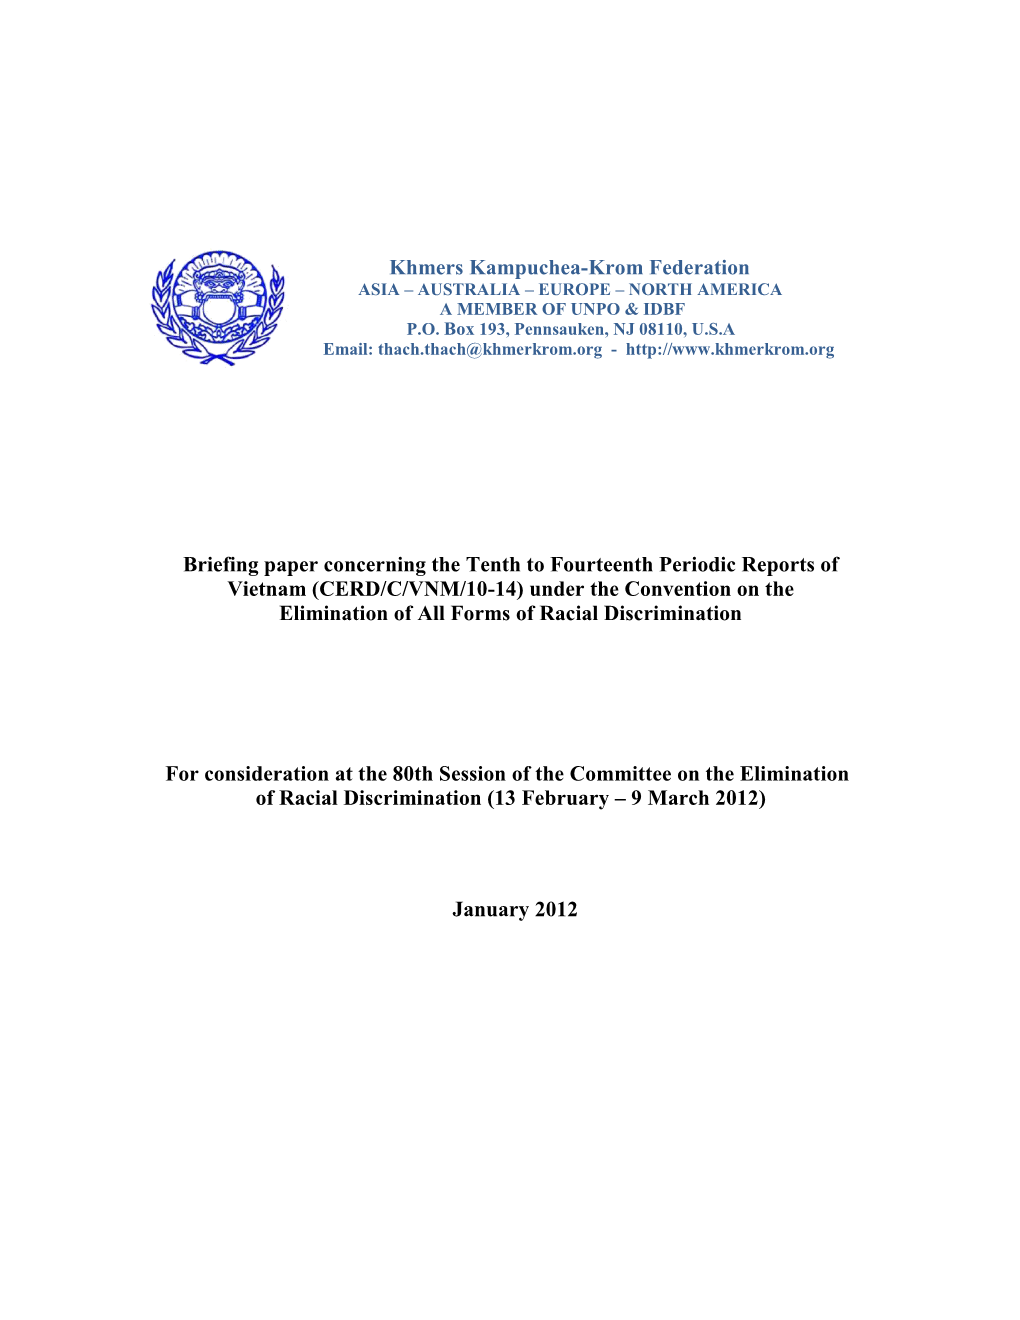 Khmers Kampuchea-Krom Federation Briefing Paper Concerning the Tenth